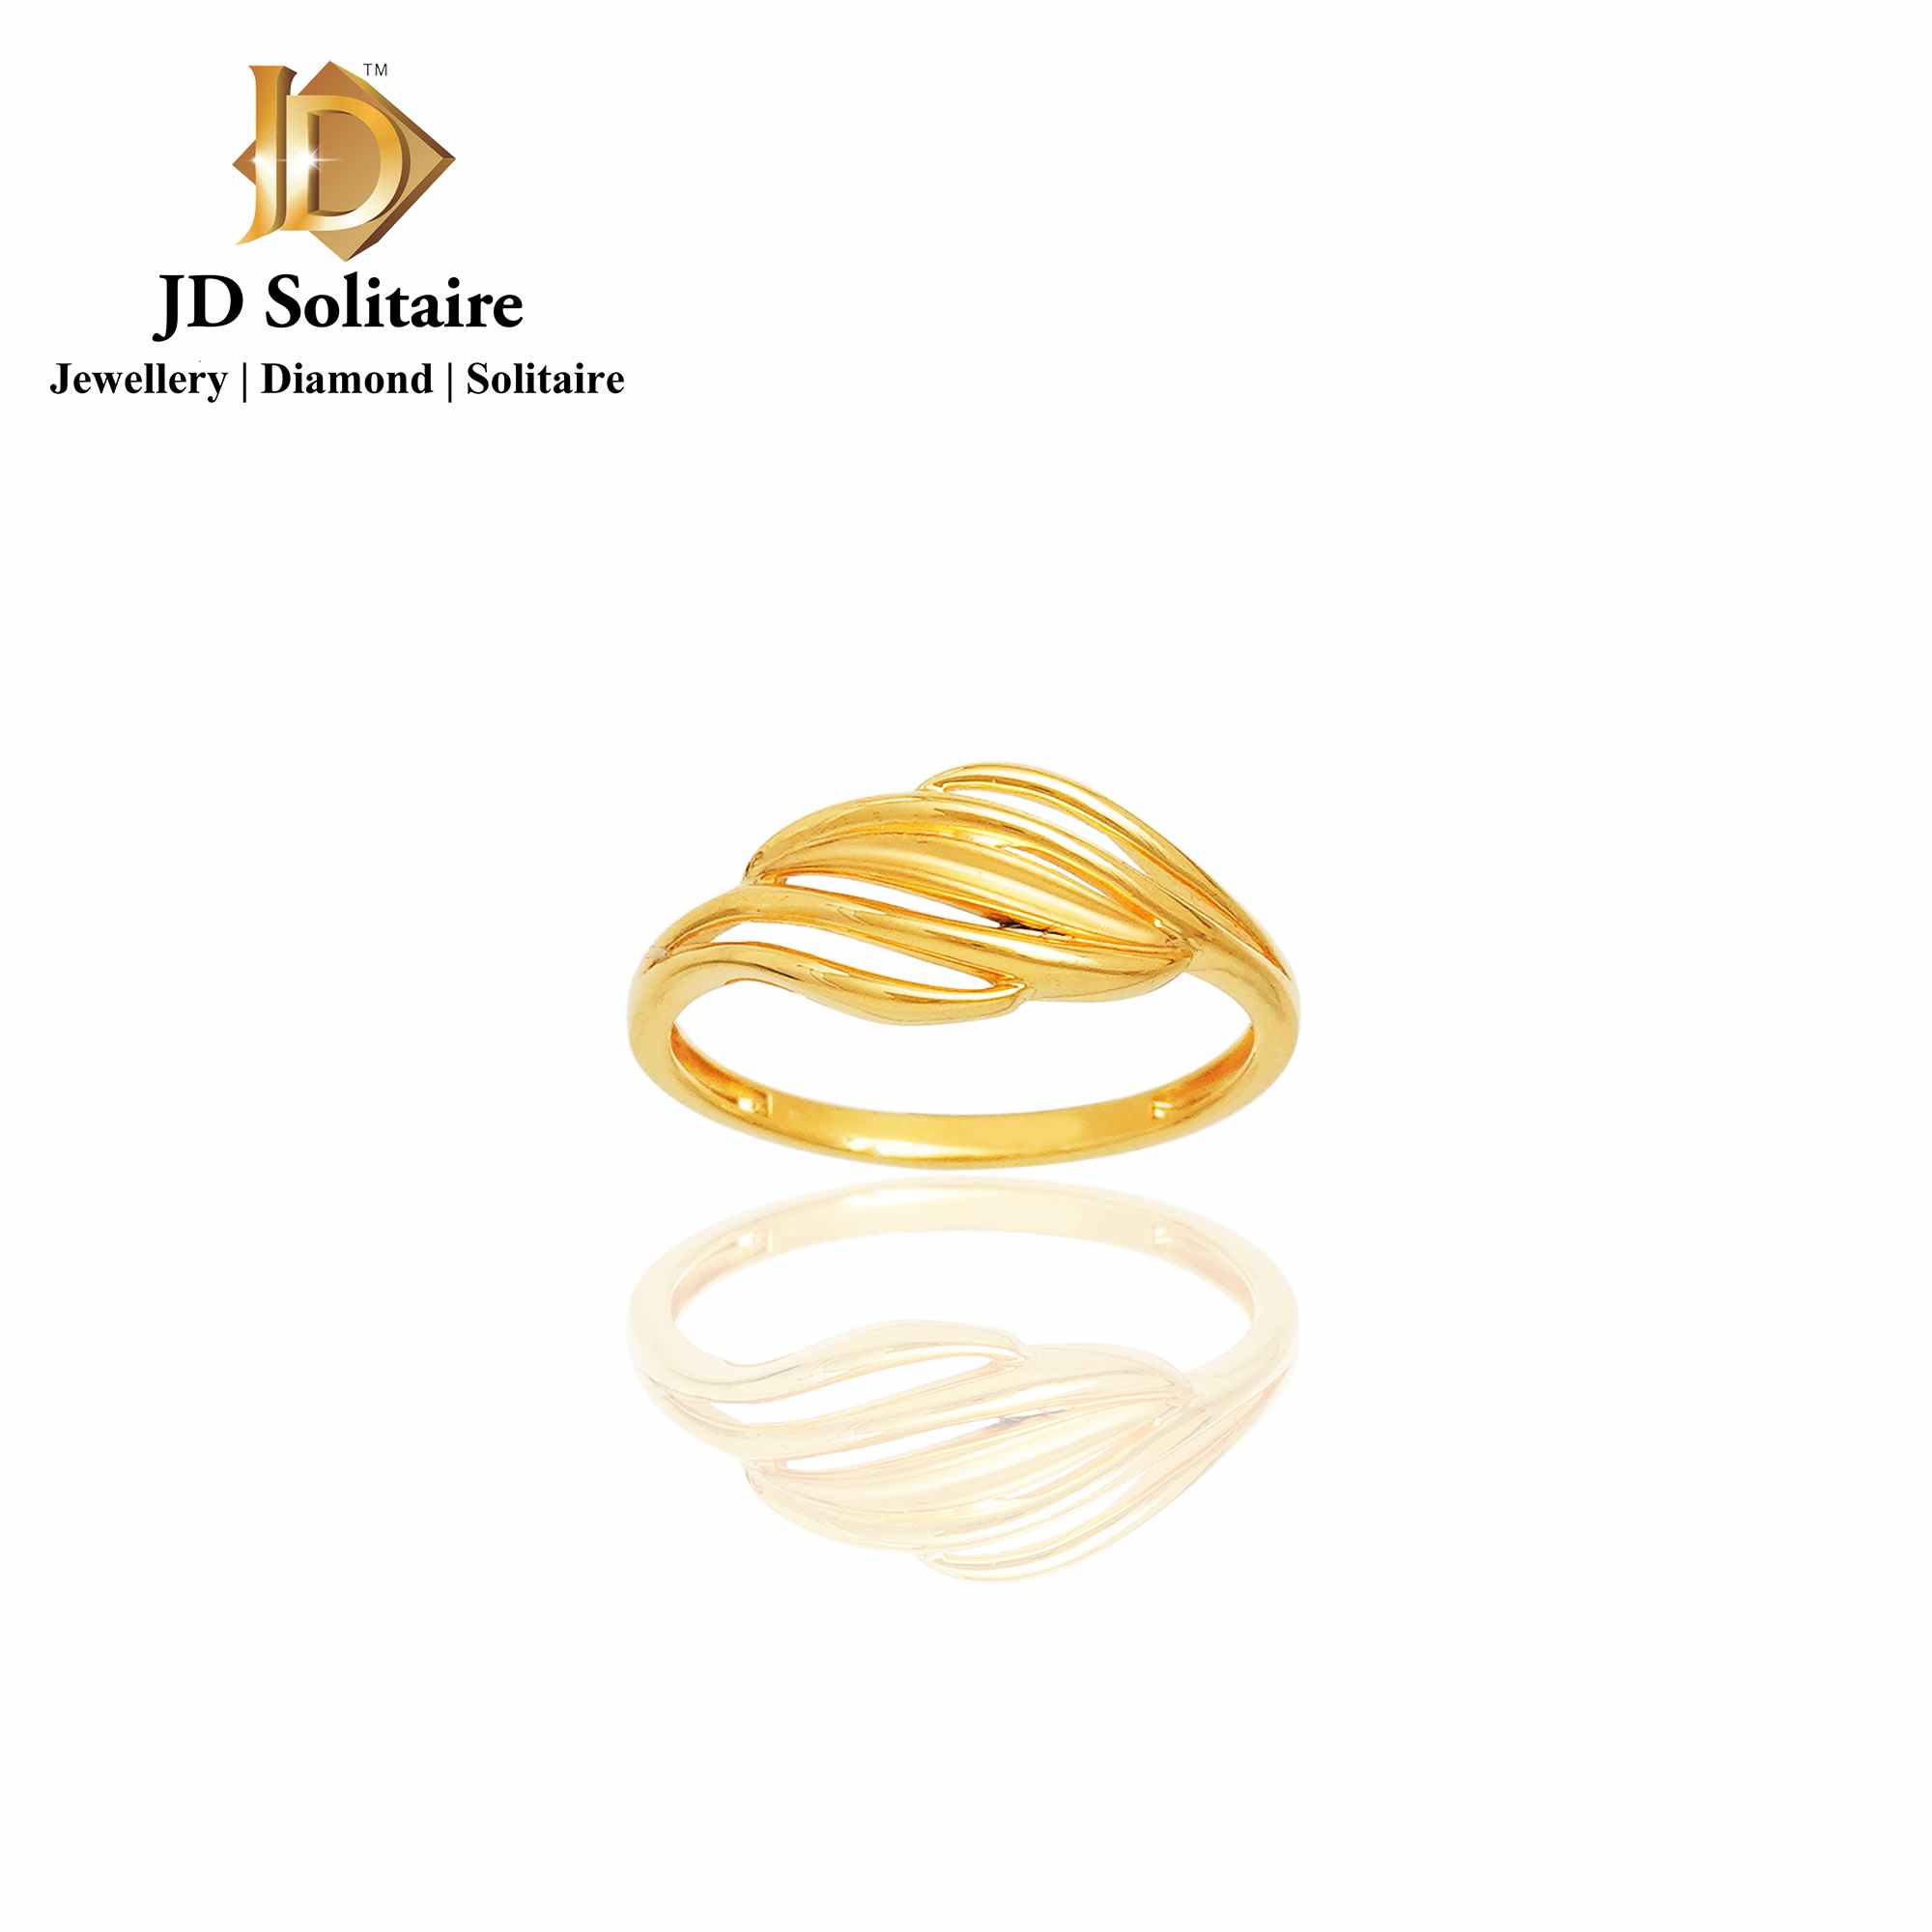 22kt gold ring design with weight and price | Latest GOLD RING For women | Gold  ring designs, Ring designs, Mehndi designs